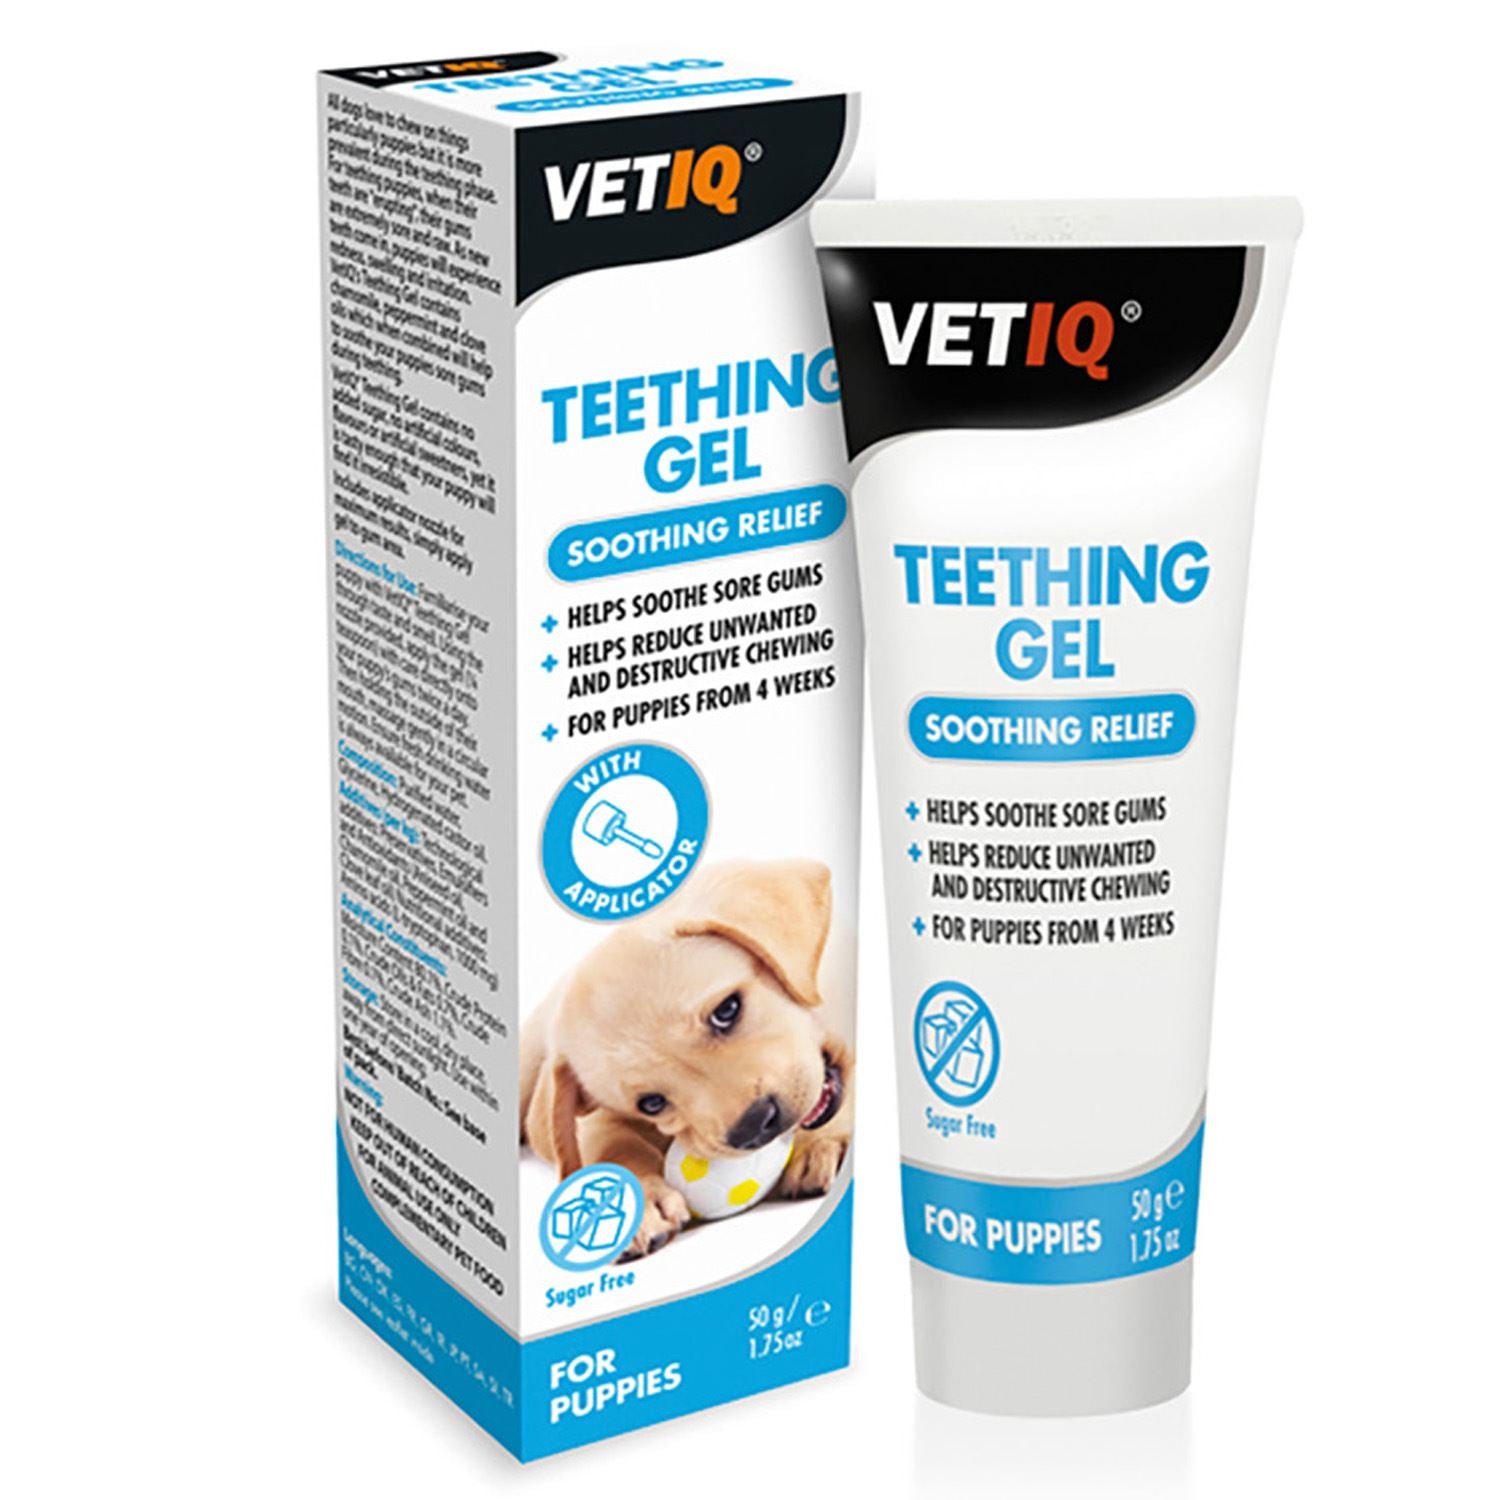 Vetiq Teething Gel For Puppies - Just Horse Riders